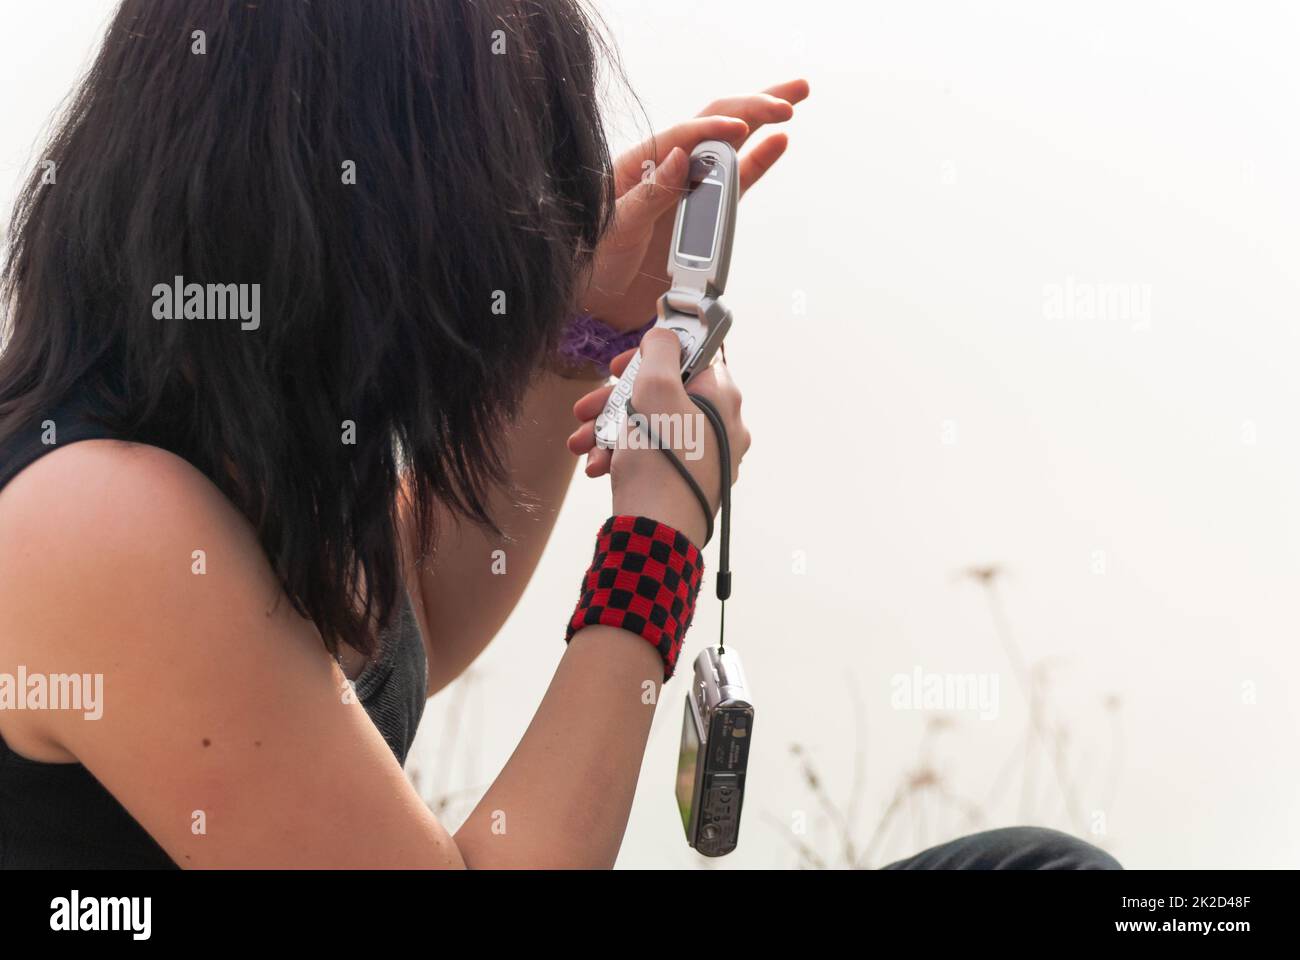 Punk emo girl, young adult with black hair using mobile phone Stock Photo